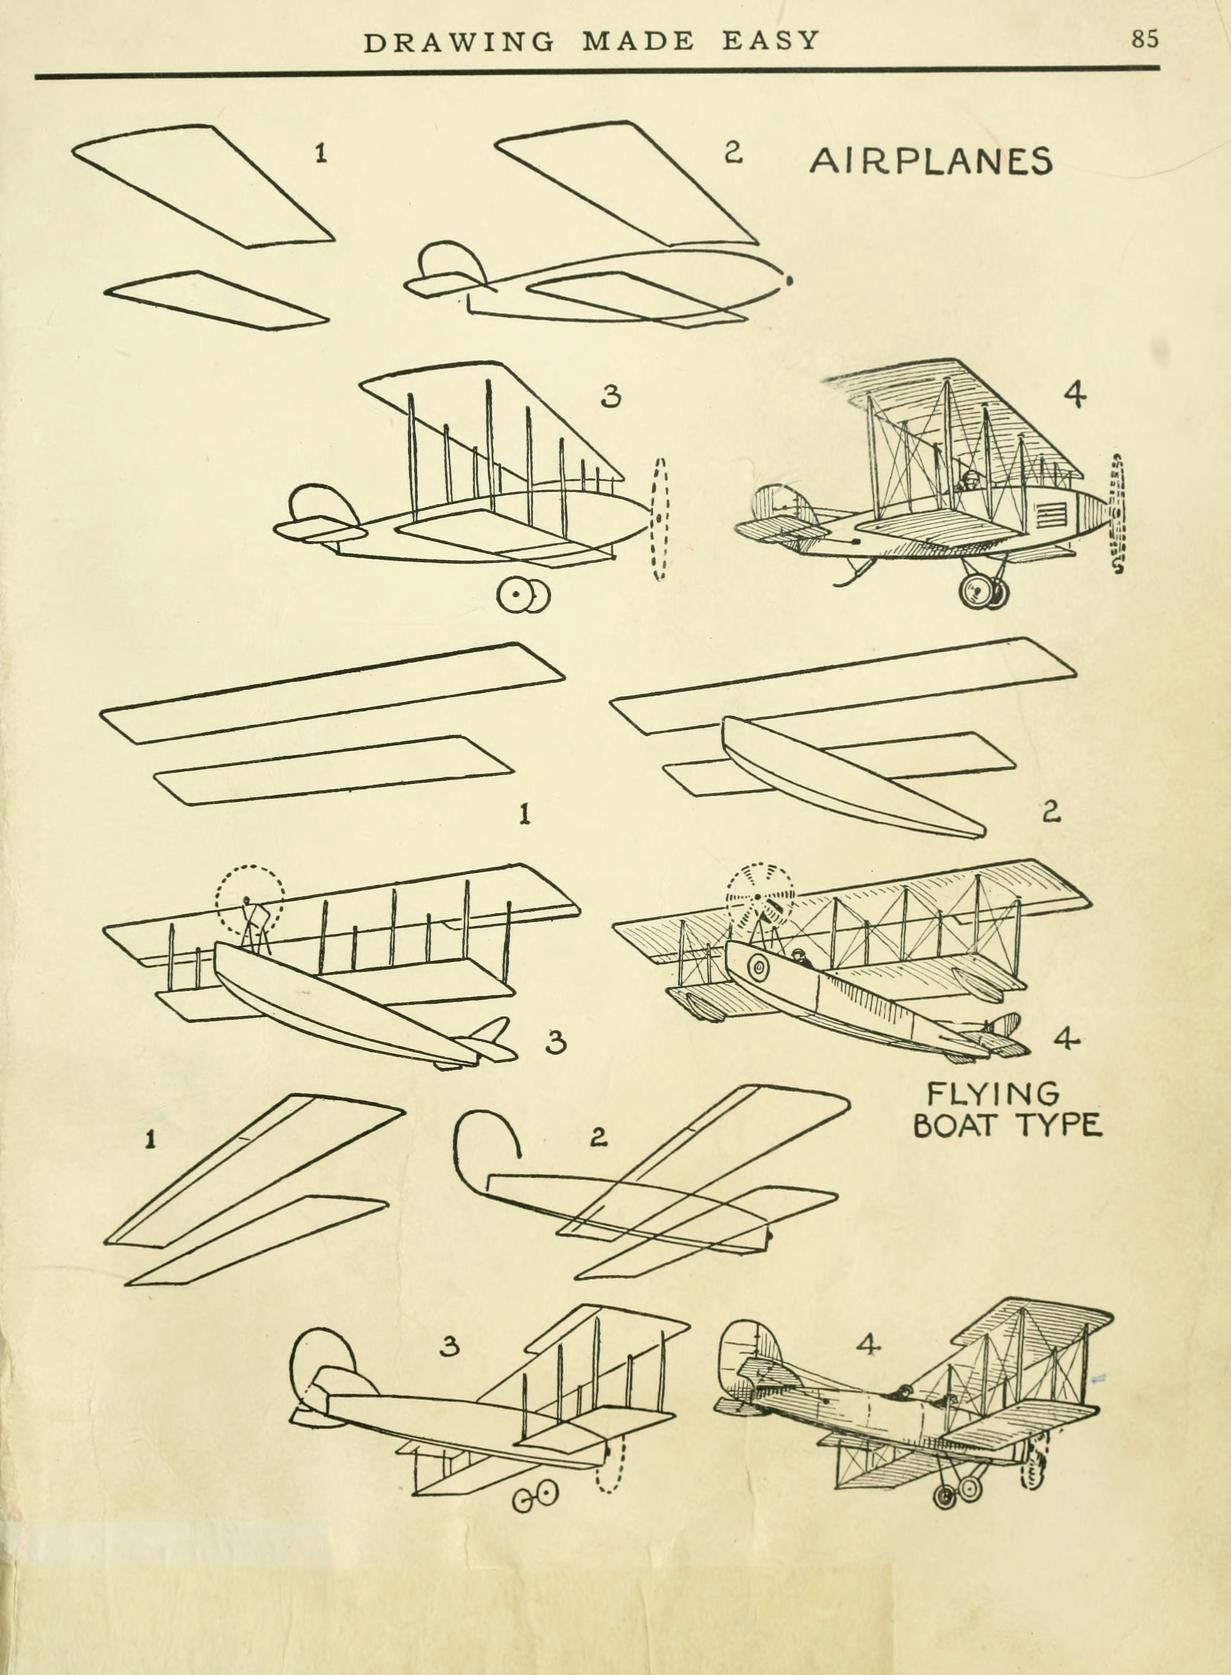 Easy Vintage Drawings Drawing Made Easy A Helpful Book for Young Ar Art Pinterest